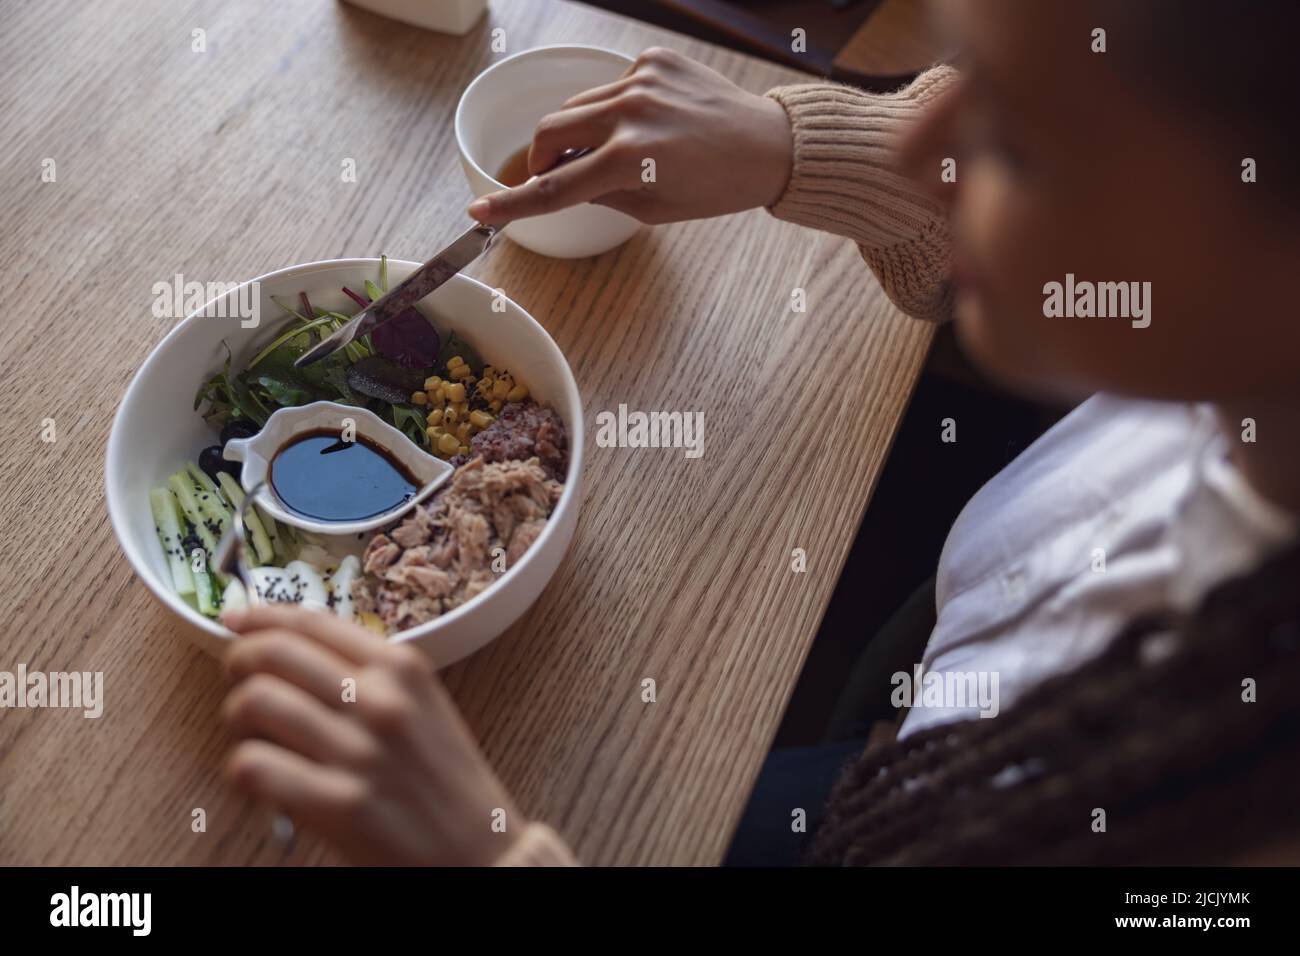 Top view of woman holding cutlery and eating healthy food served in white ceramic bowl at food and drink establishment Stock Photo